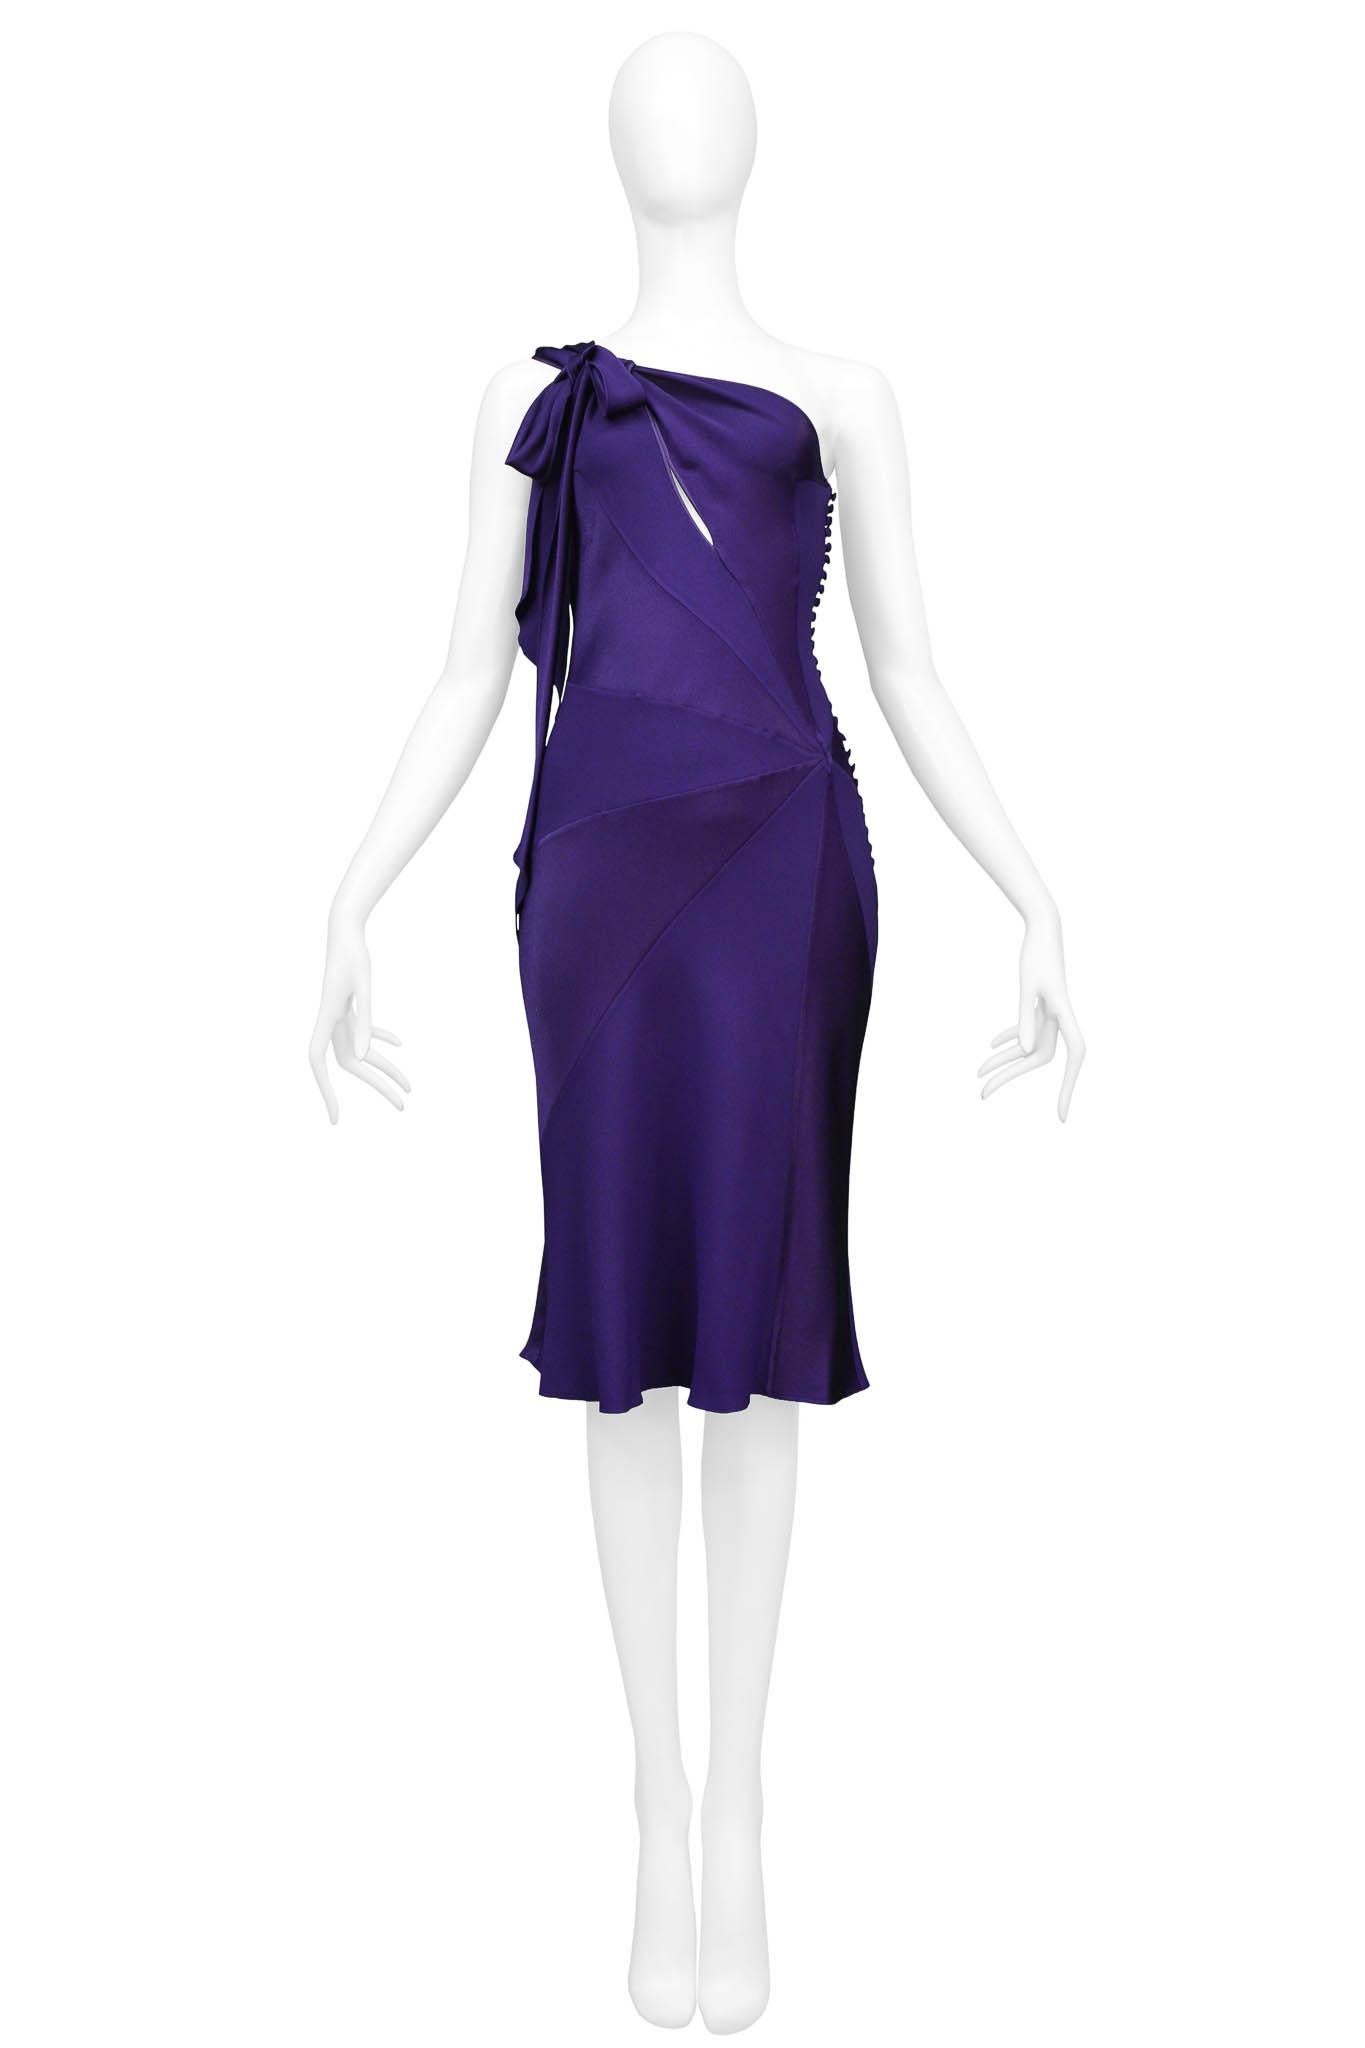 Resurrection is excited to offer a vintage John Galliano purple bias dress featuring, one shoulder strap with a bow at the front, an open slit along the bust area, and signature multi-button closure along the side seam.

John Galliano
Size F